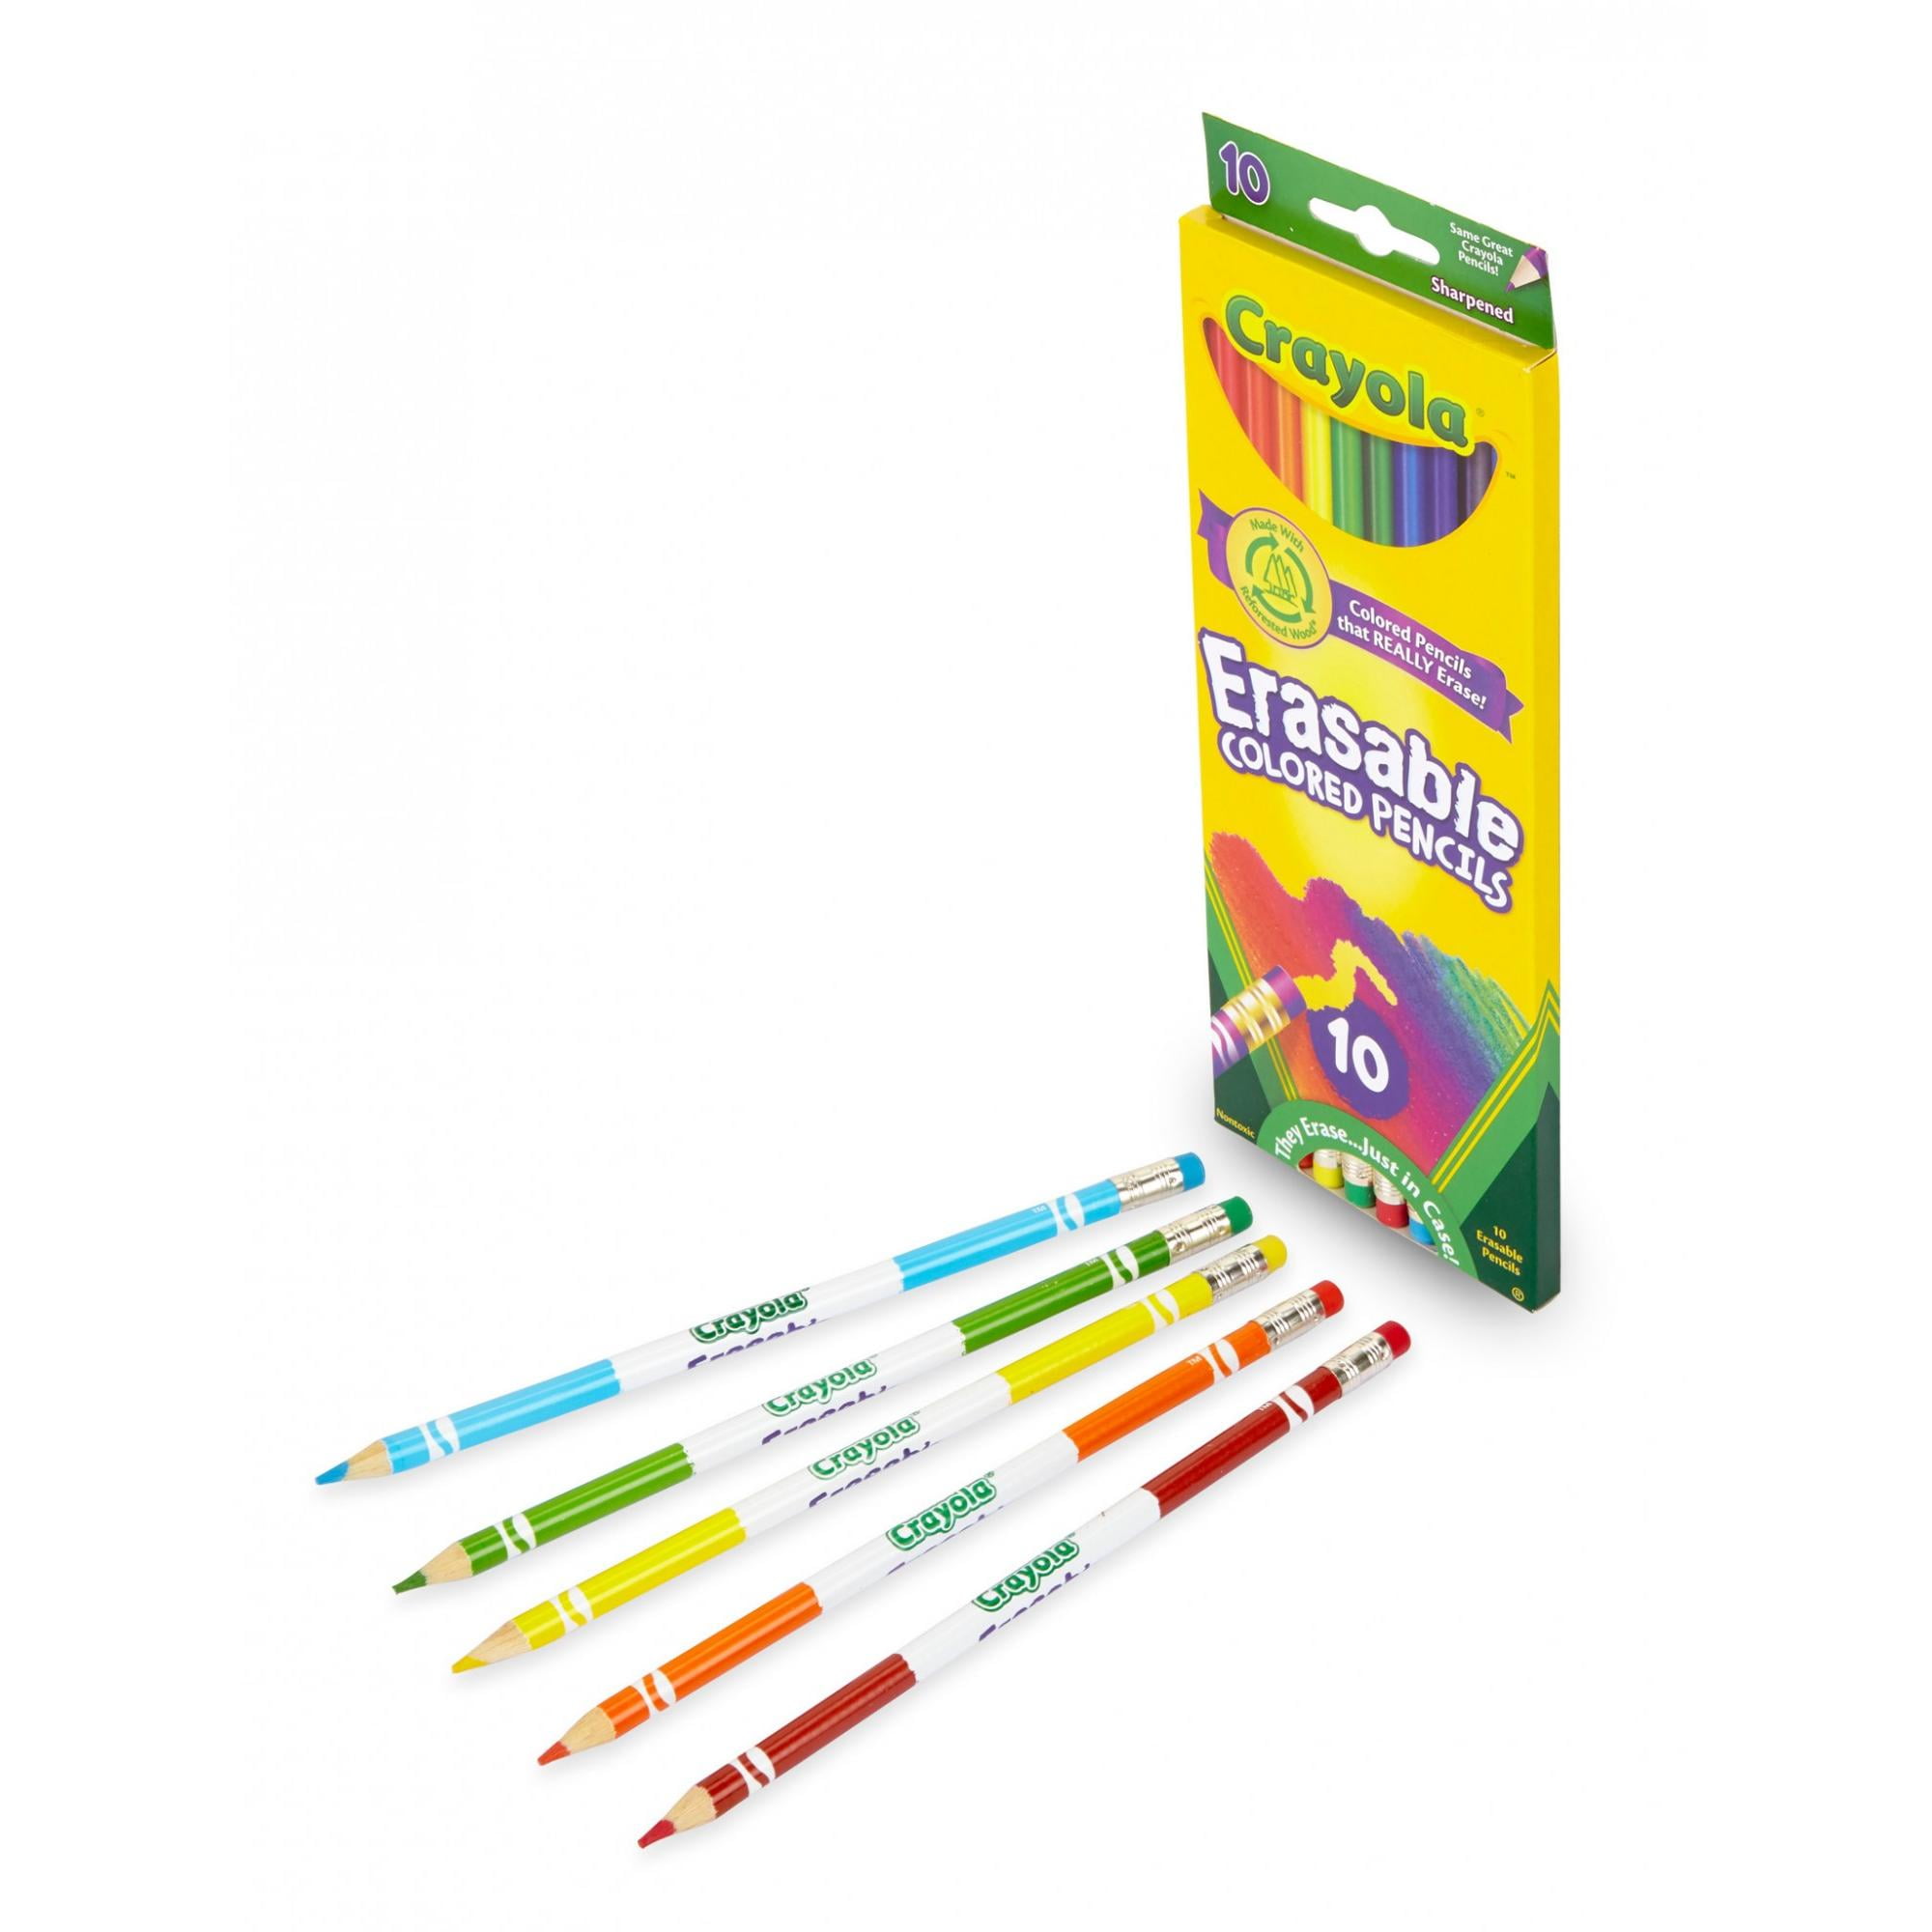 Fully Erasable Pencils Colored Pencil Set for Adult Coloring Books or Kids 4 & Up Great for Shading Line Art & More Gradation Crayola Erasable Colored Pencils 12 Non-Toxic Pre-Sharpened 